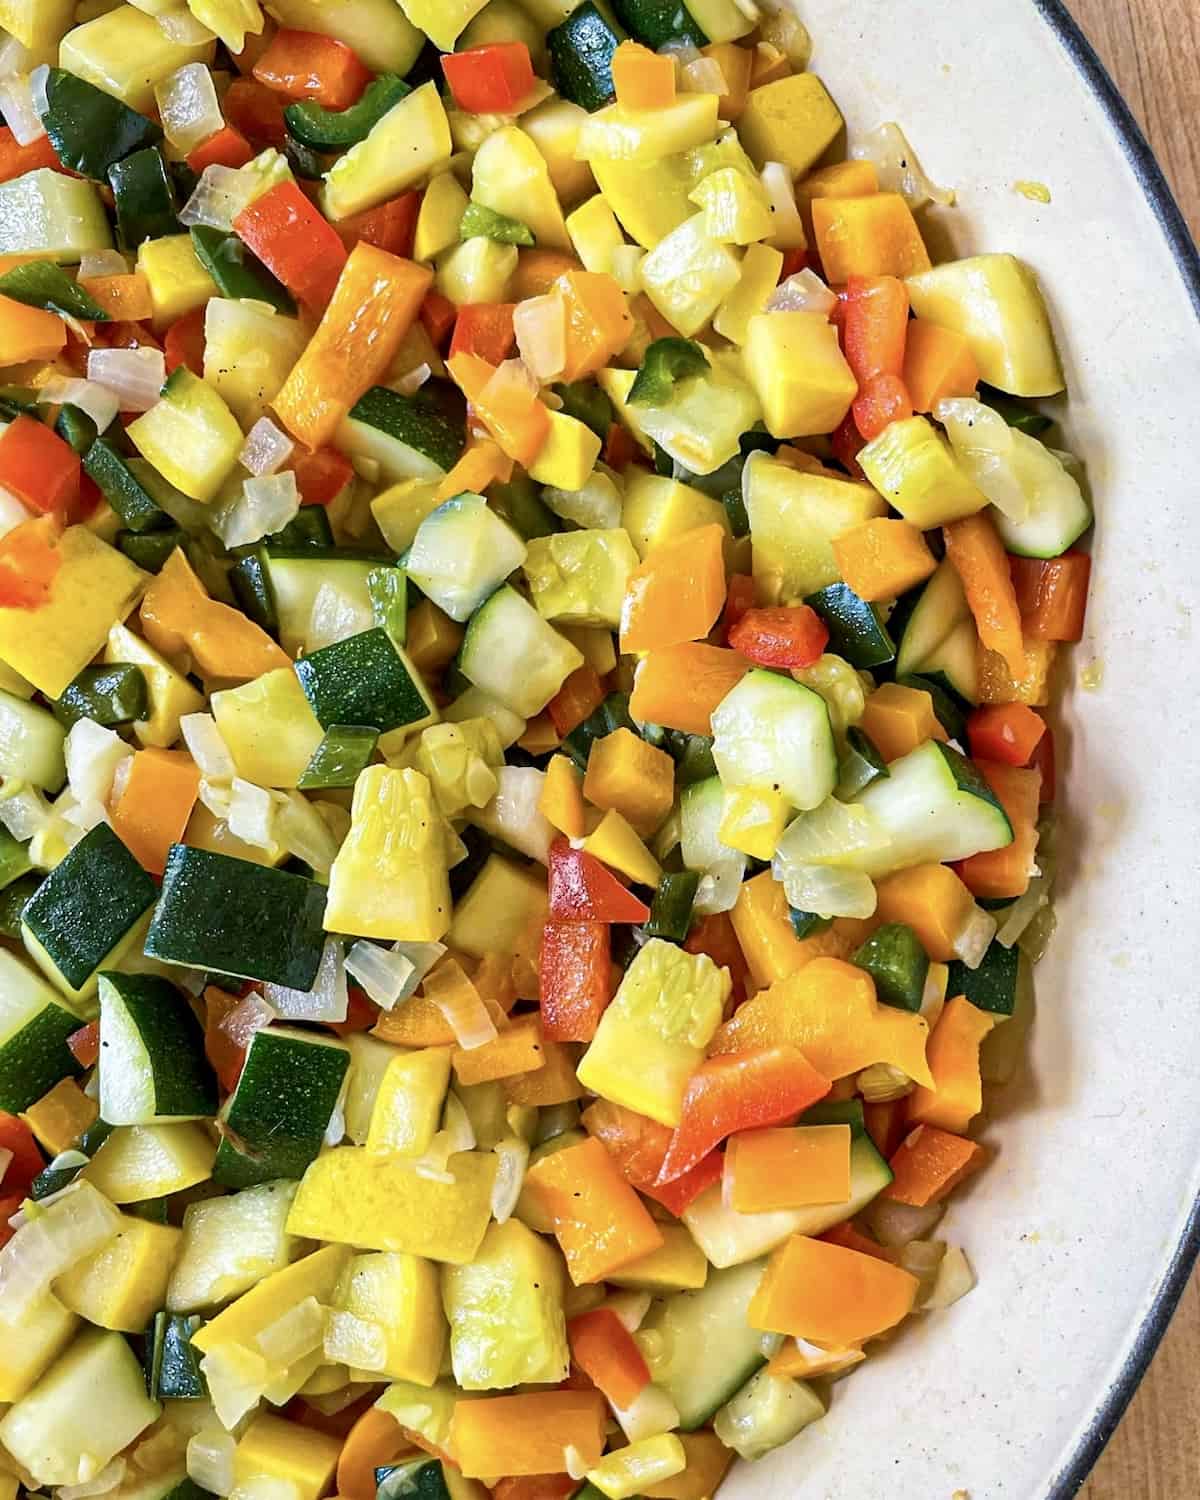 A mixture of diced onions, poblano peppers, bell peppers, zucchini, and yellow squash that have been cooked until soft in a skillet.